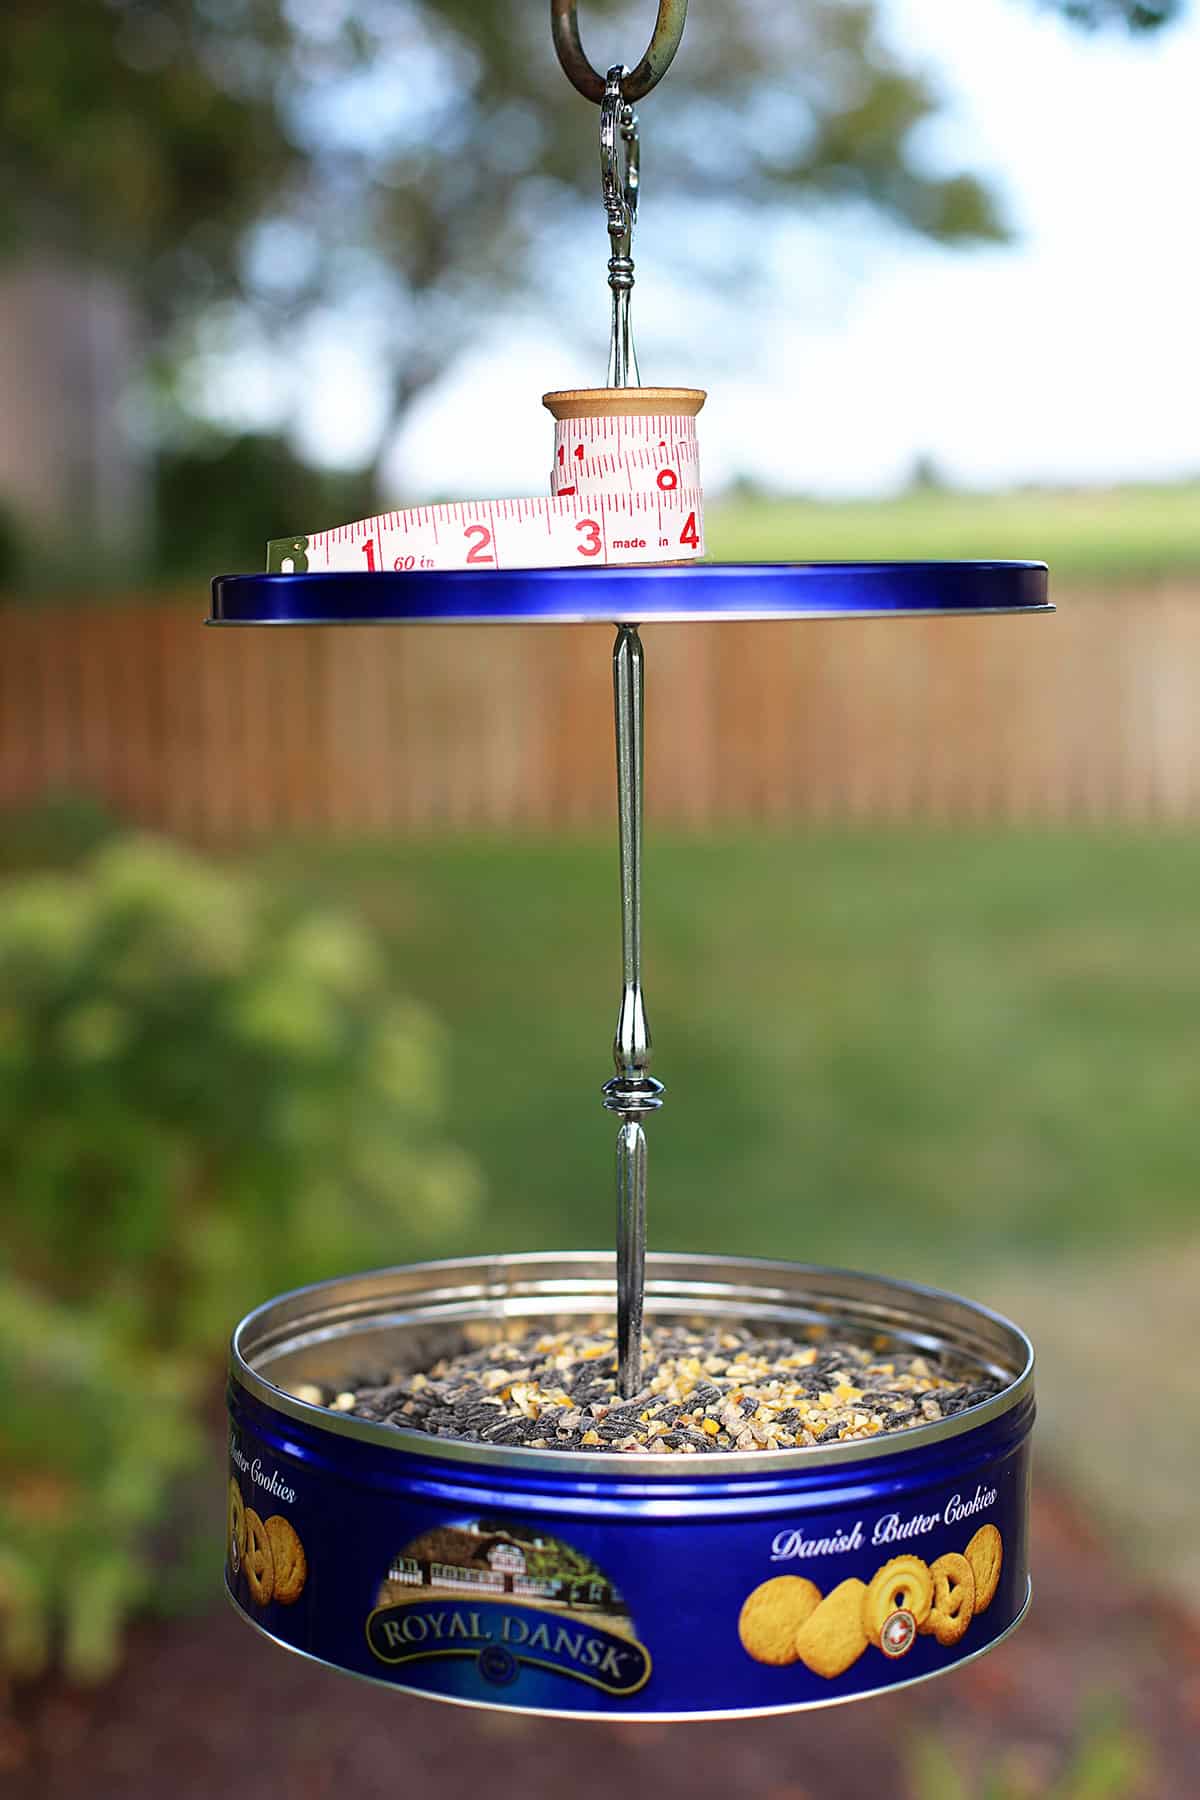 DIY bird feeder made from a Danish butter cookies tin. The top of the bird feeder has a spool and measuring tape on it. 